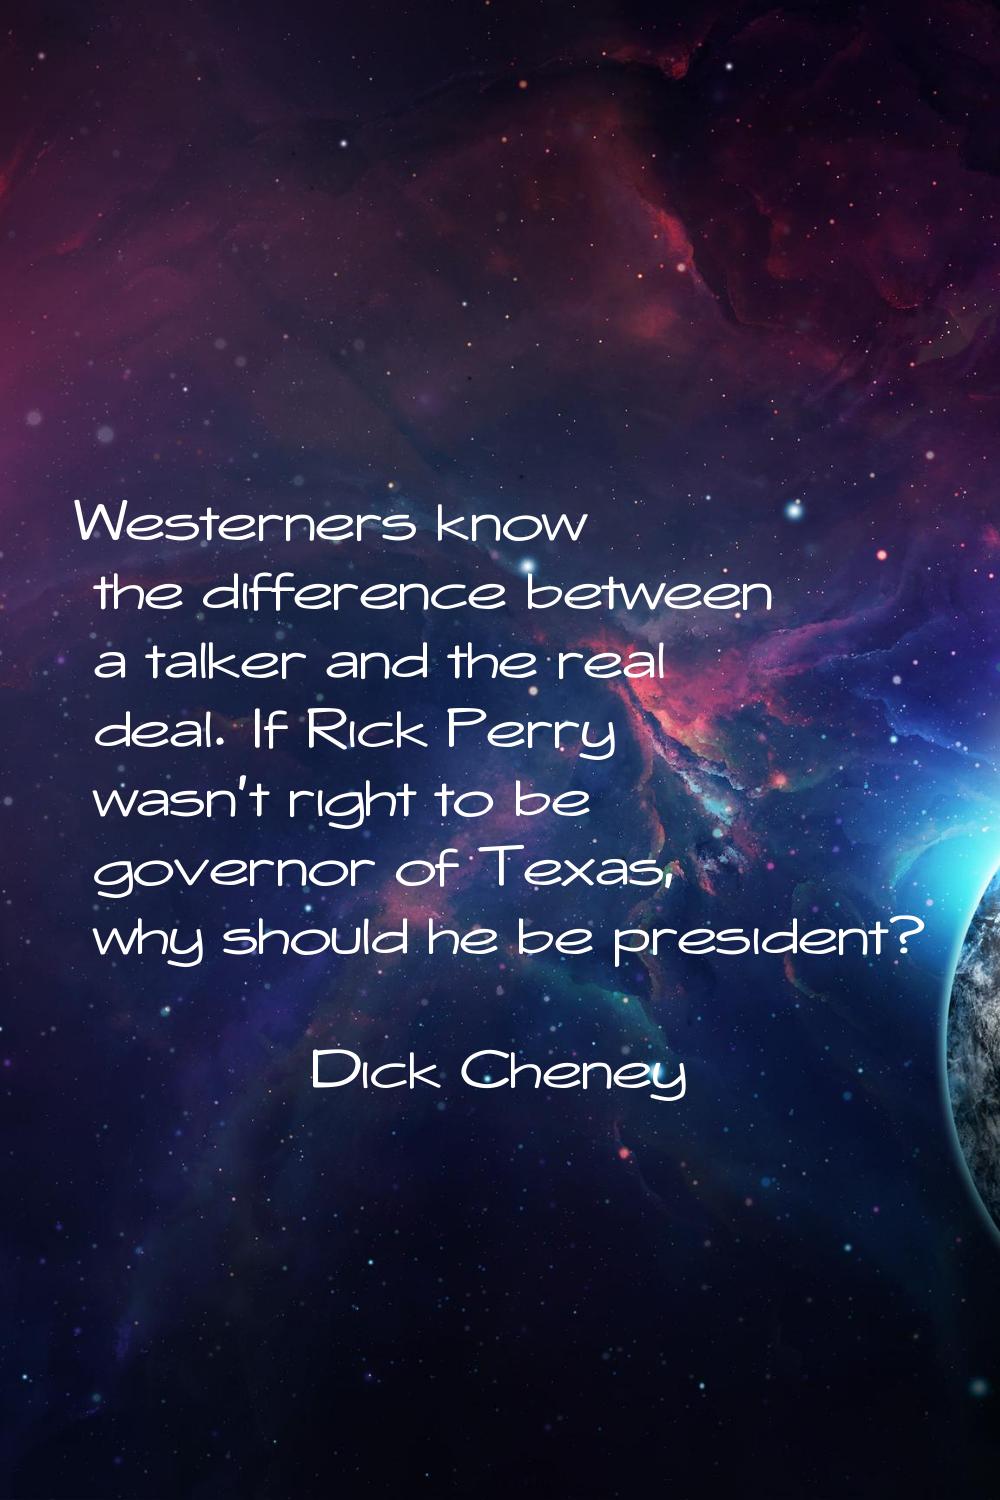 Westerners know the difference between a talker and the real deal. If Rick Perry wasn't right to be